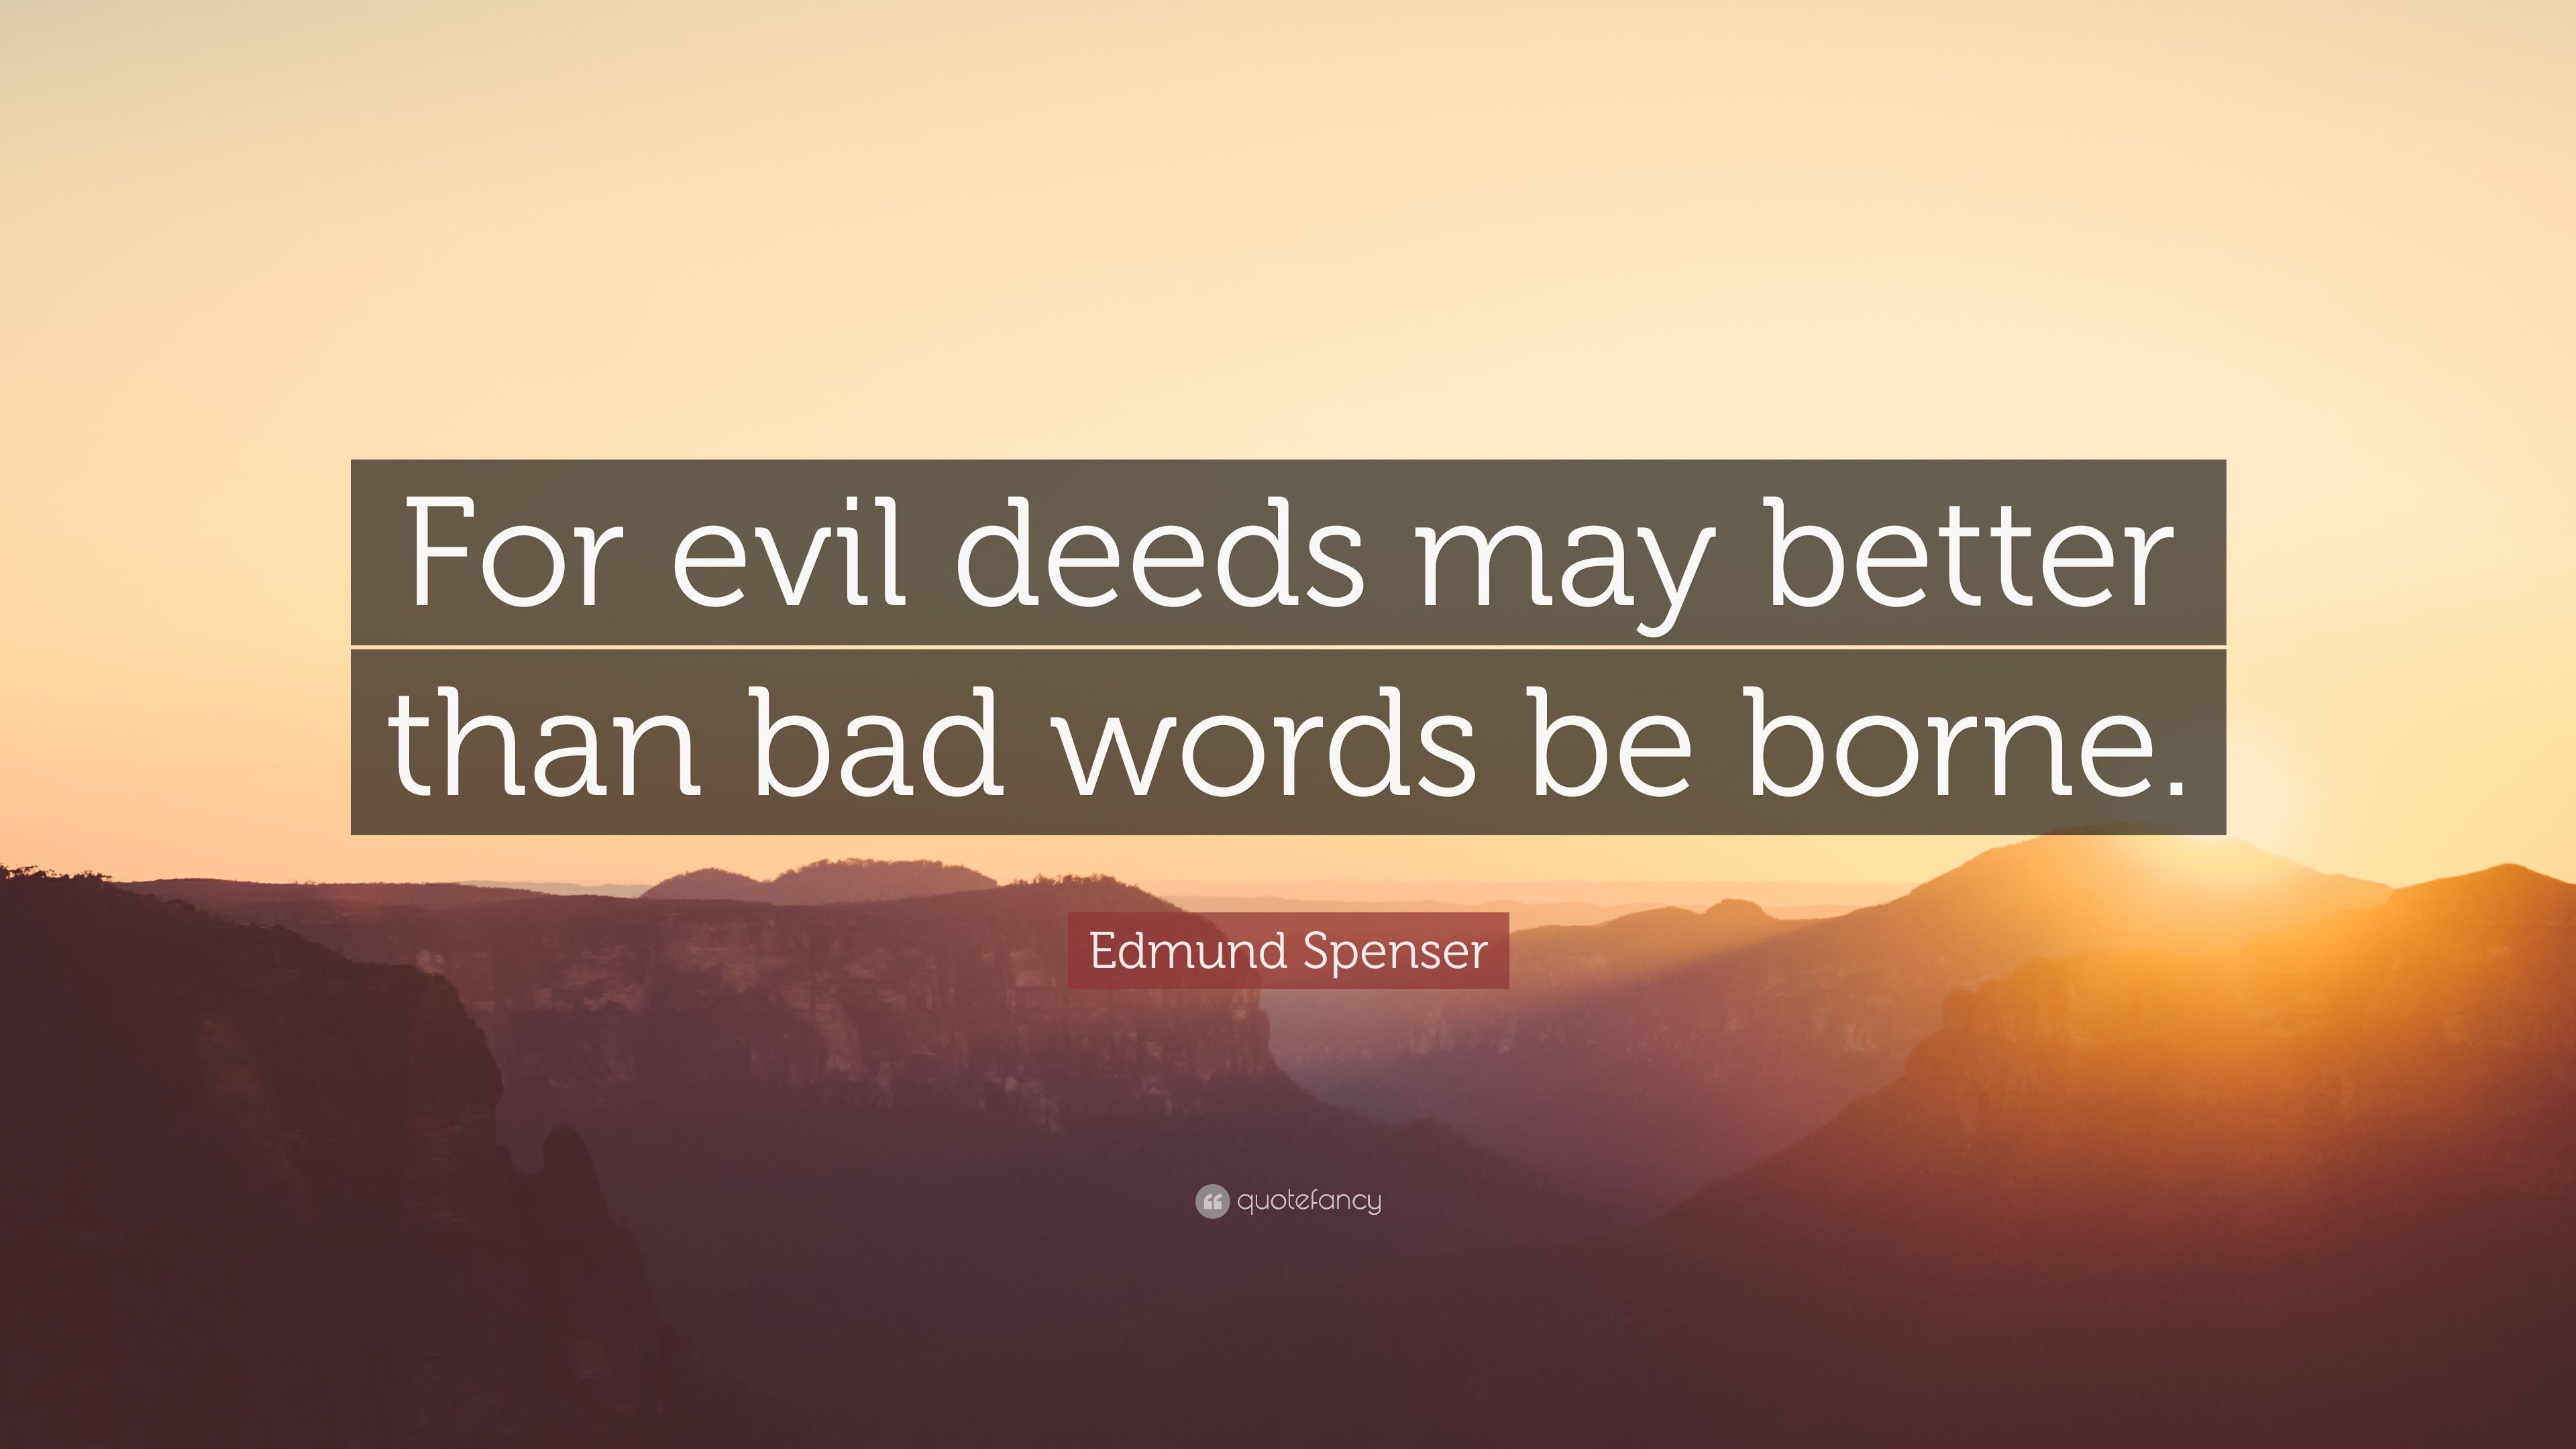 Edmund Spenser Quote: "For evil deeds may better than bad words be 